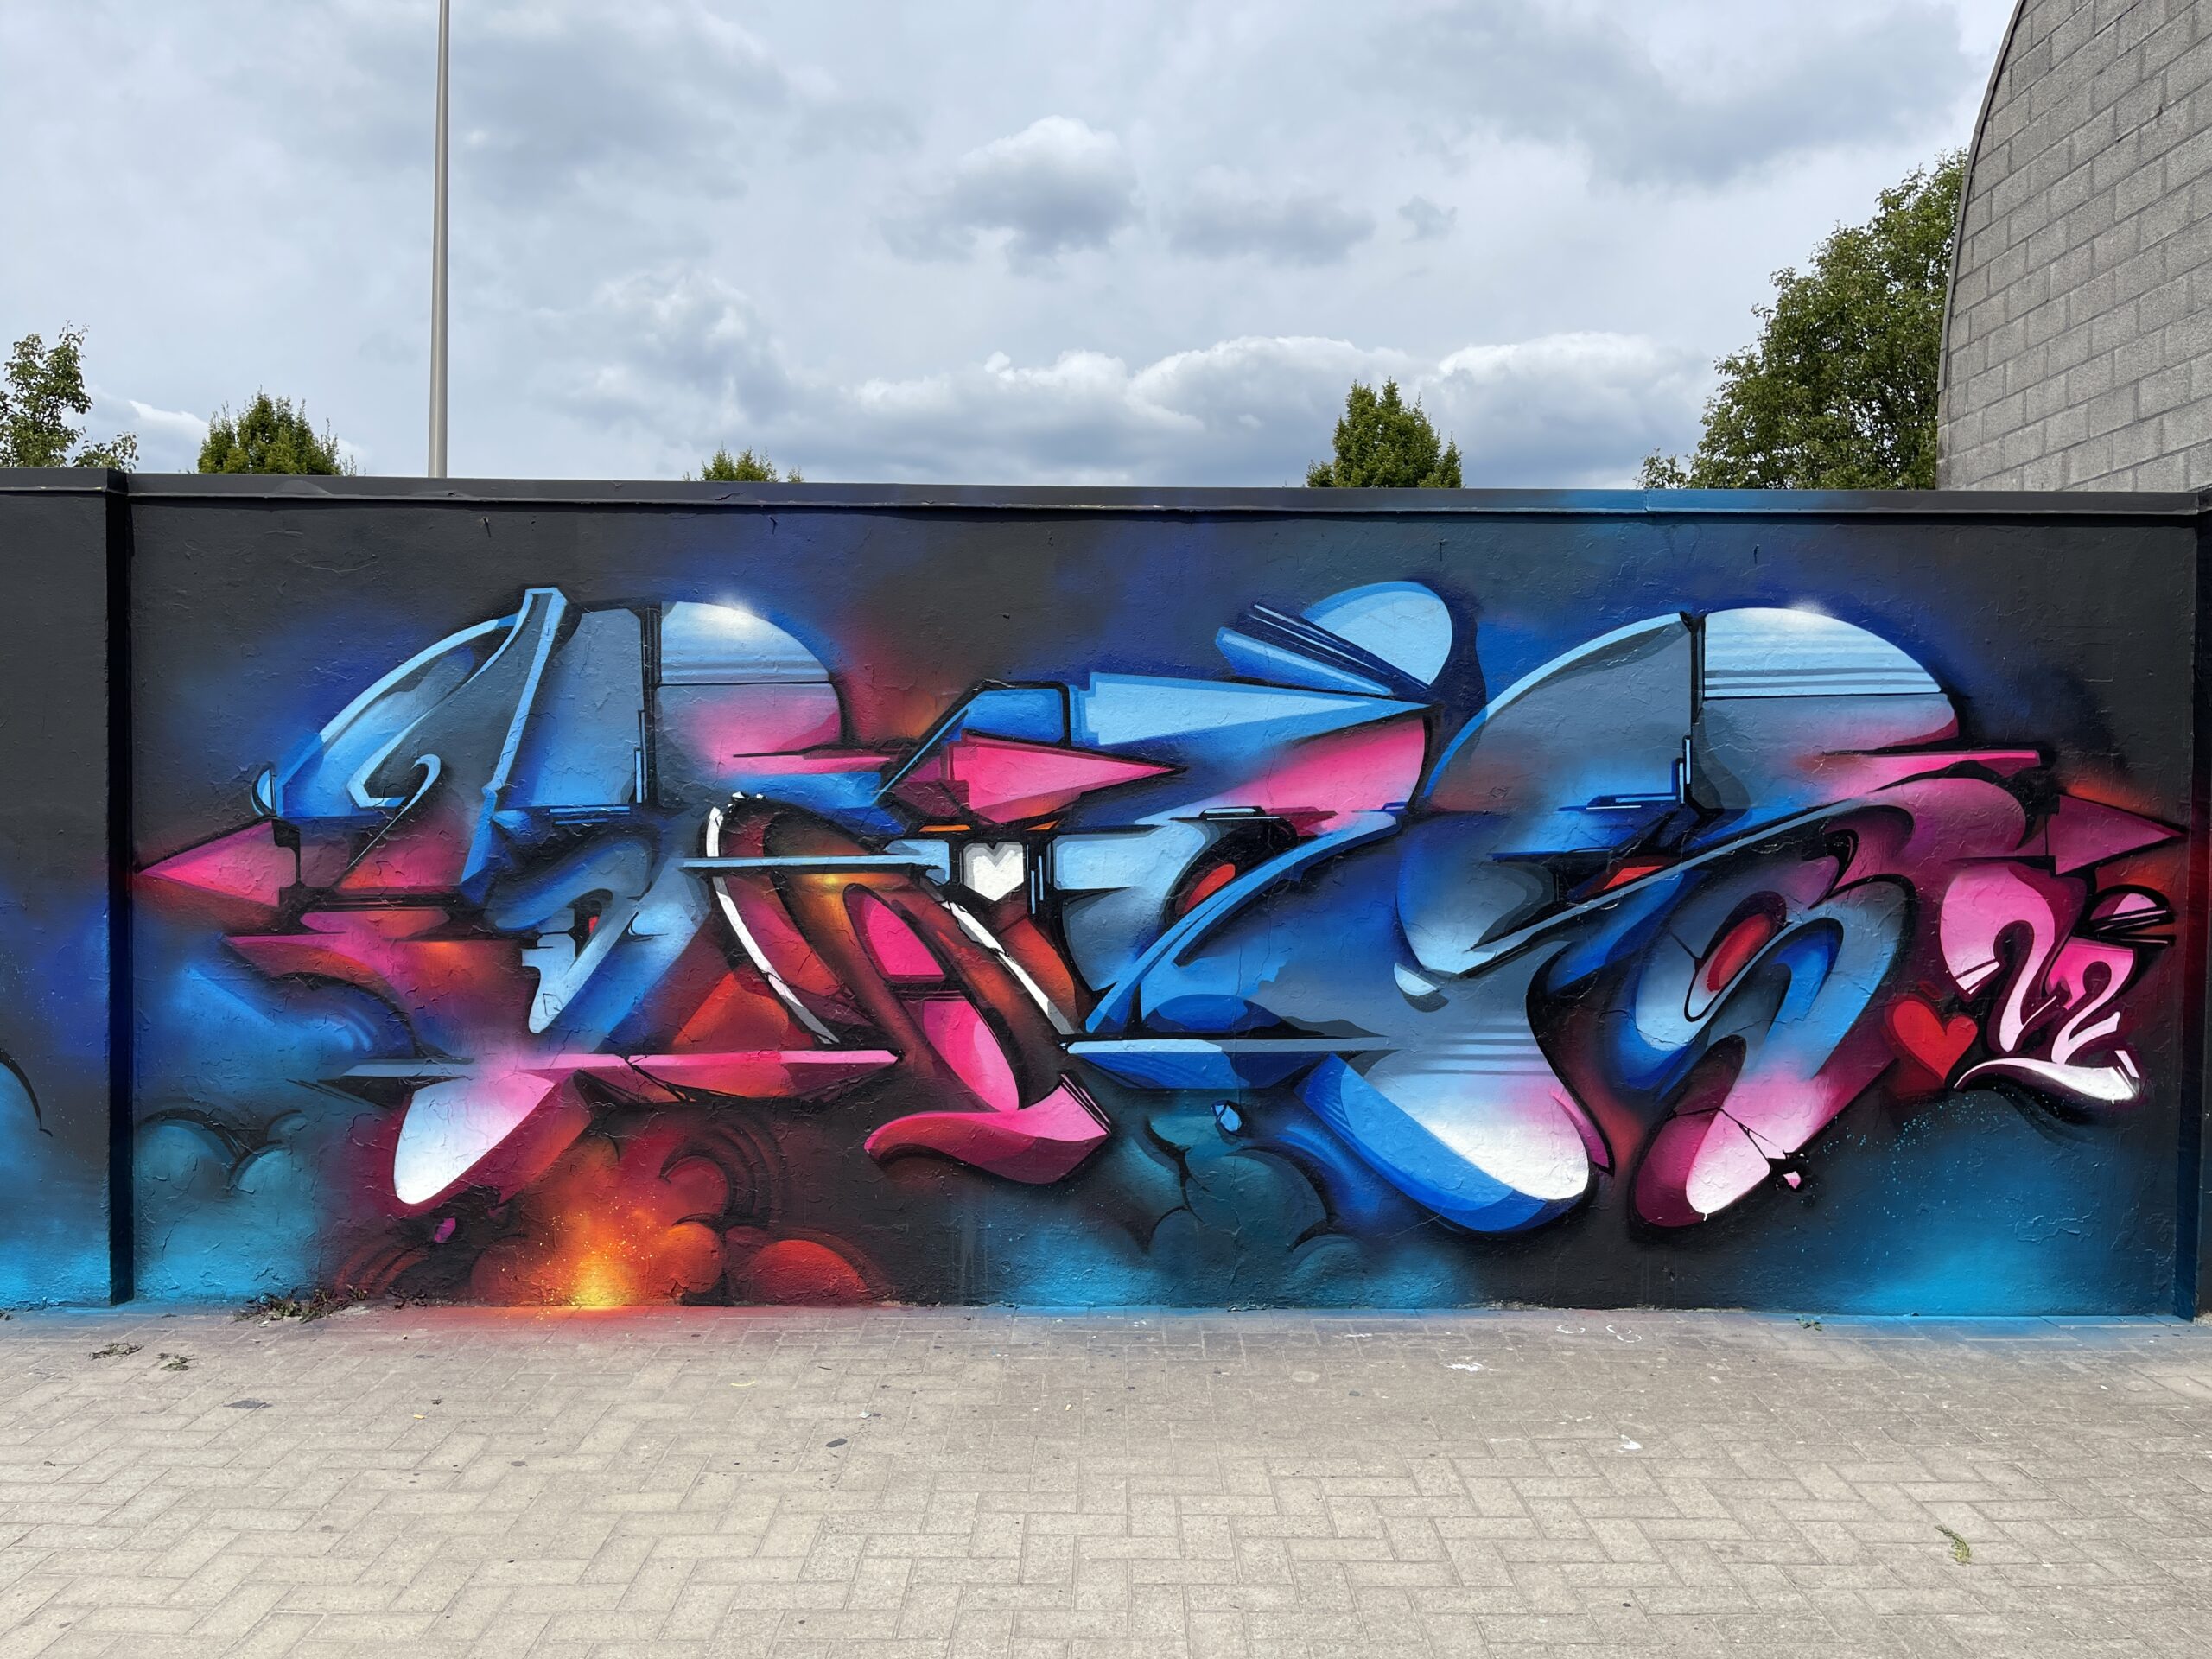 A work by Does - Masseik, Belgium 2022